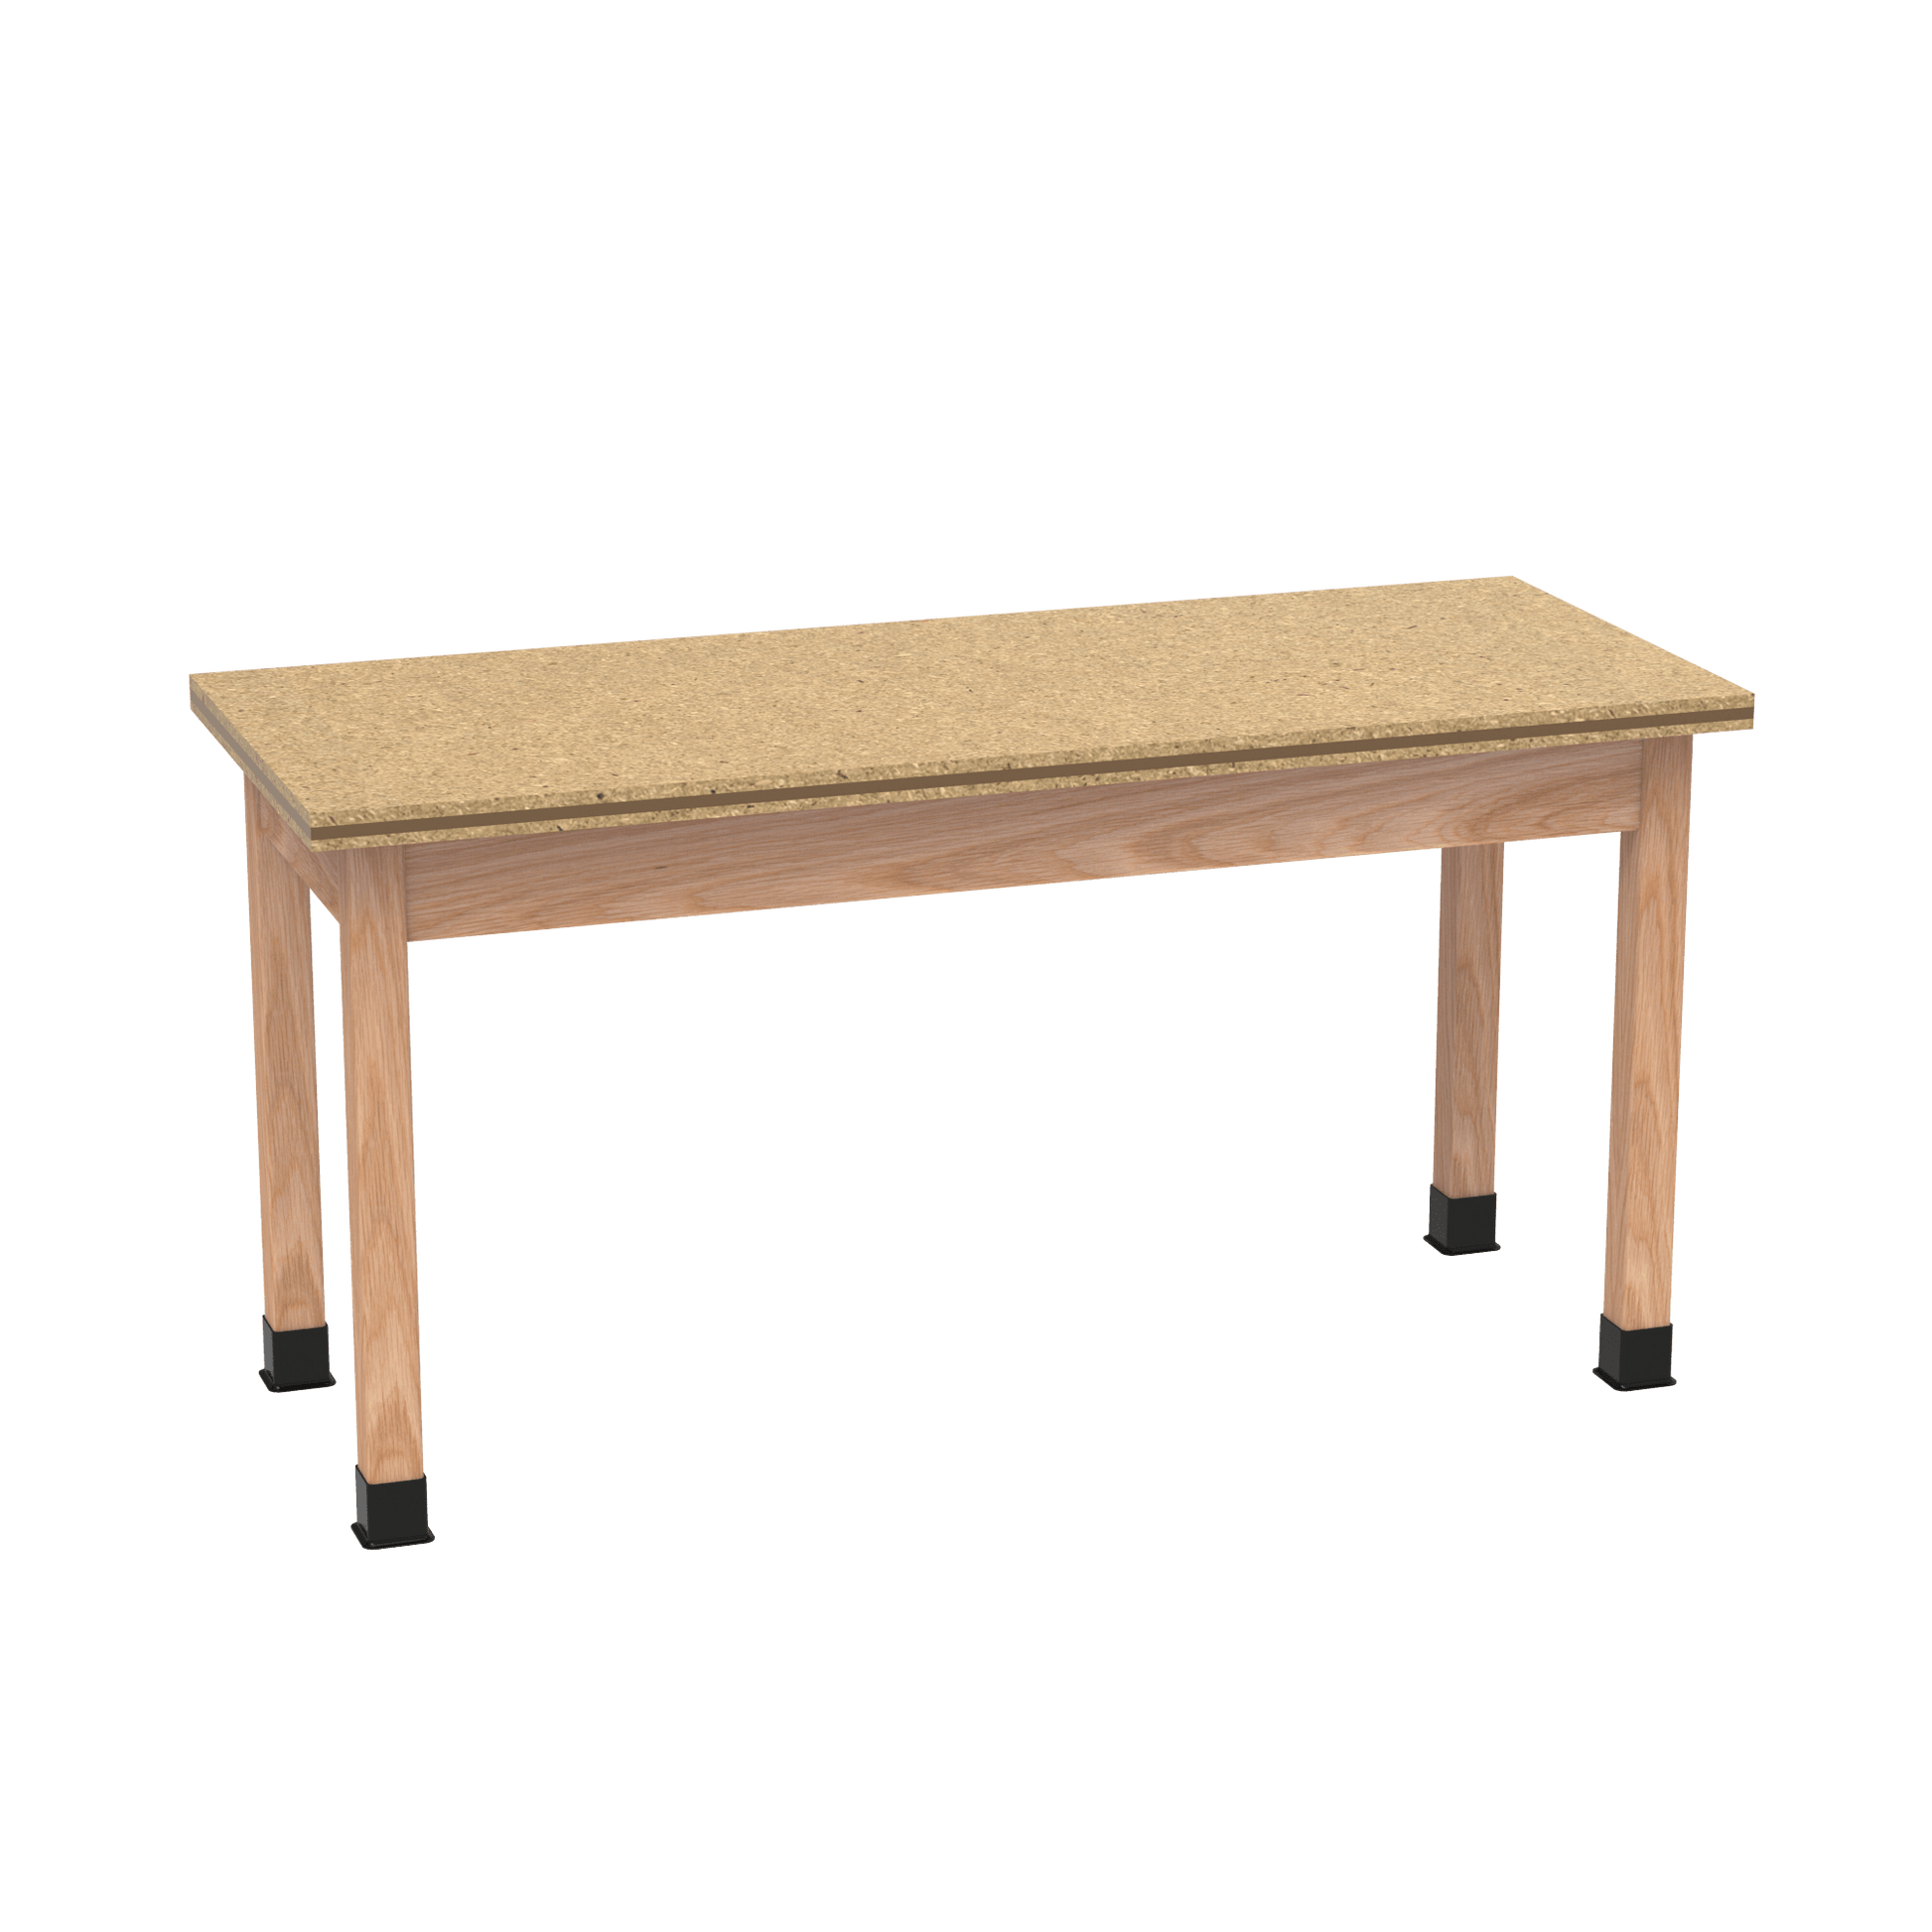 Diversified Woodcrafts Science Table - Plain Apron - 72" W x 36" D - Solid Wood Frame and Adjustable Glides - SchoolOutlet